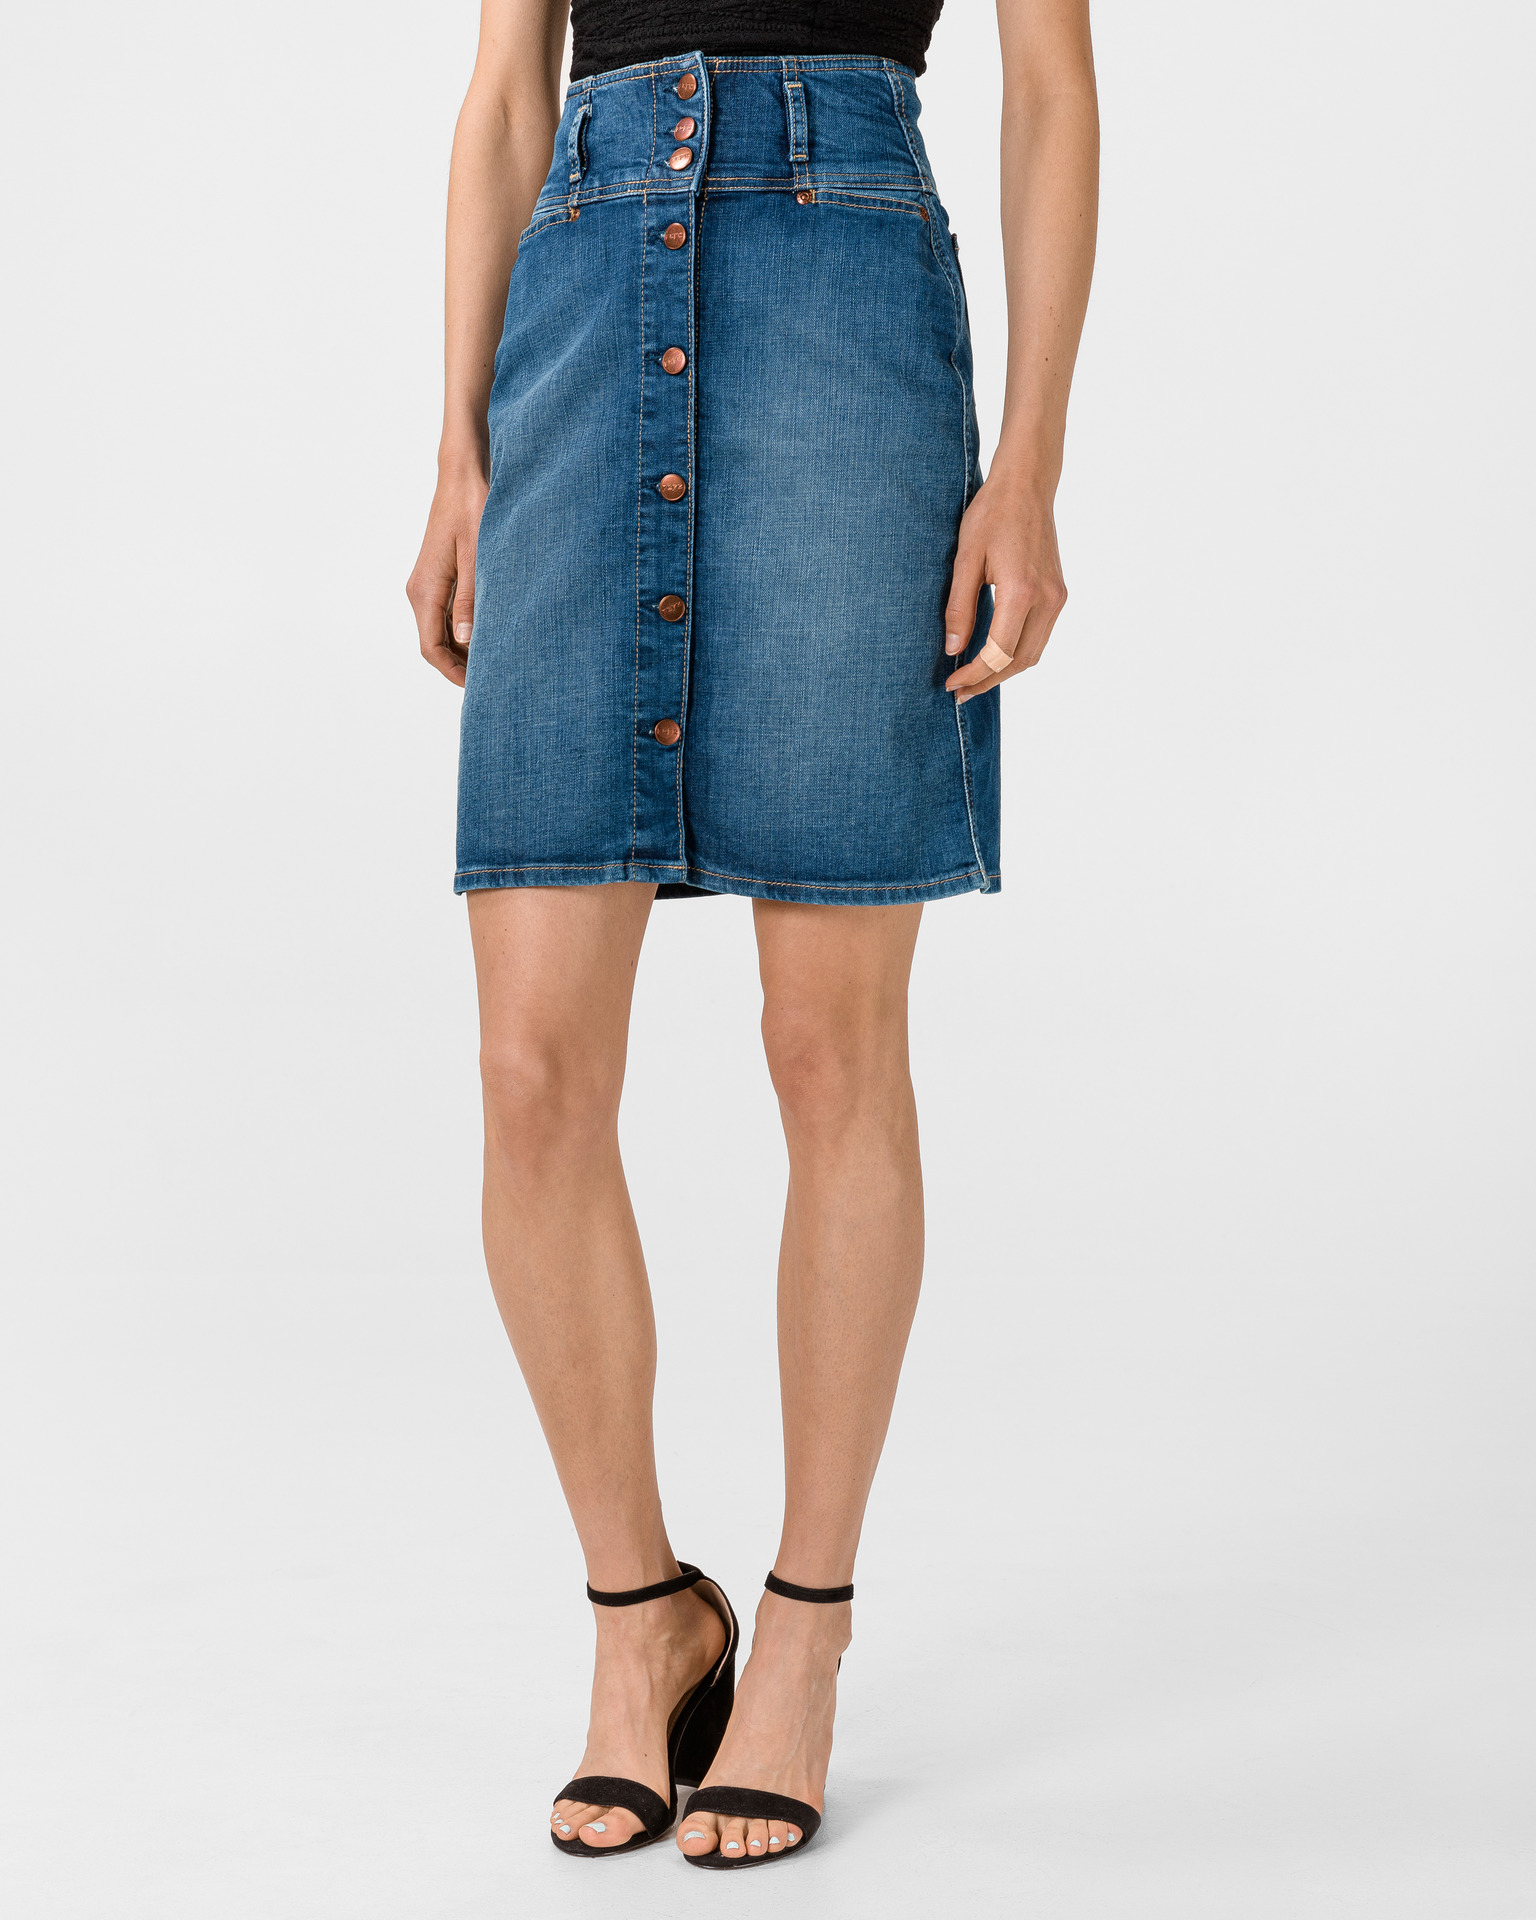 applaus Zuigeling Exclusief Pepe Jeans - Evelyn Rok Bibloo.nl